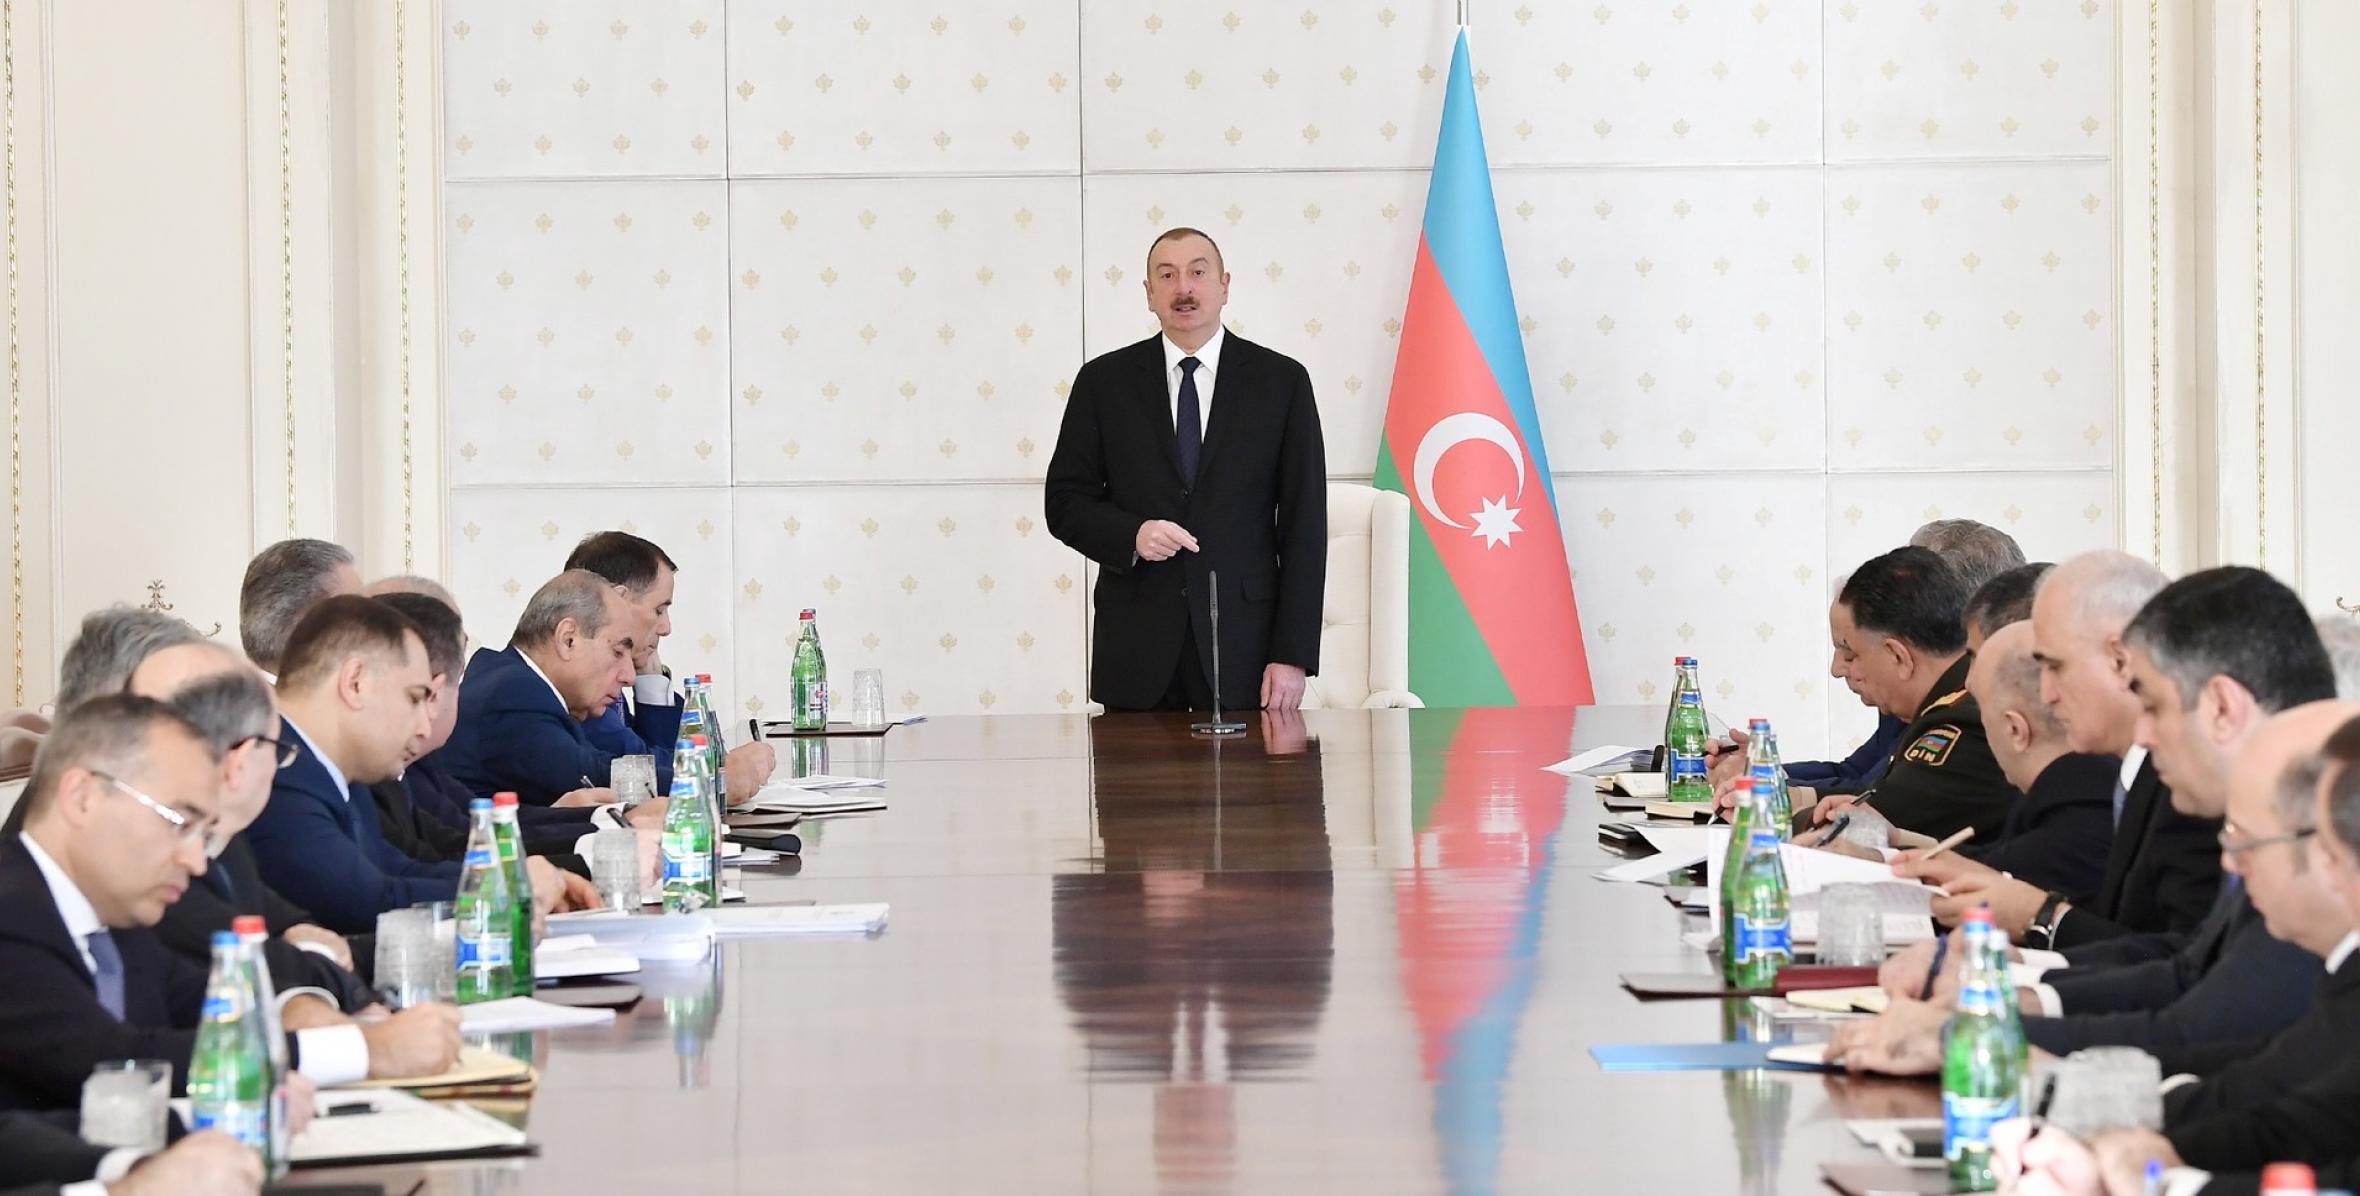 Opening speech by Ilham Aliyev at the meeting of Cabinet of Ministers dedicated to results of socioeconomic development of 2018 and objectives for future